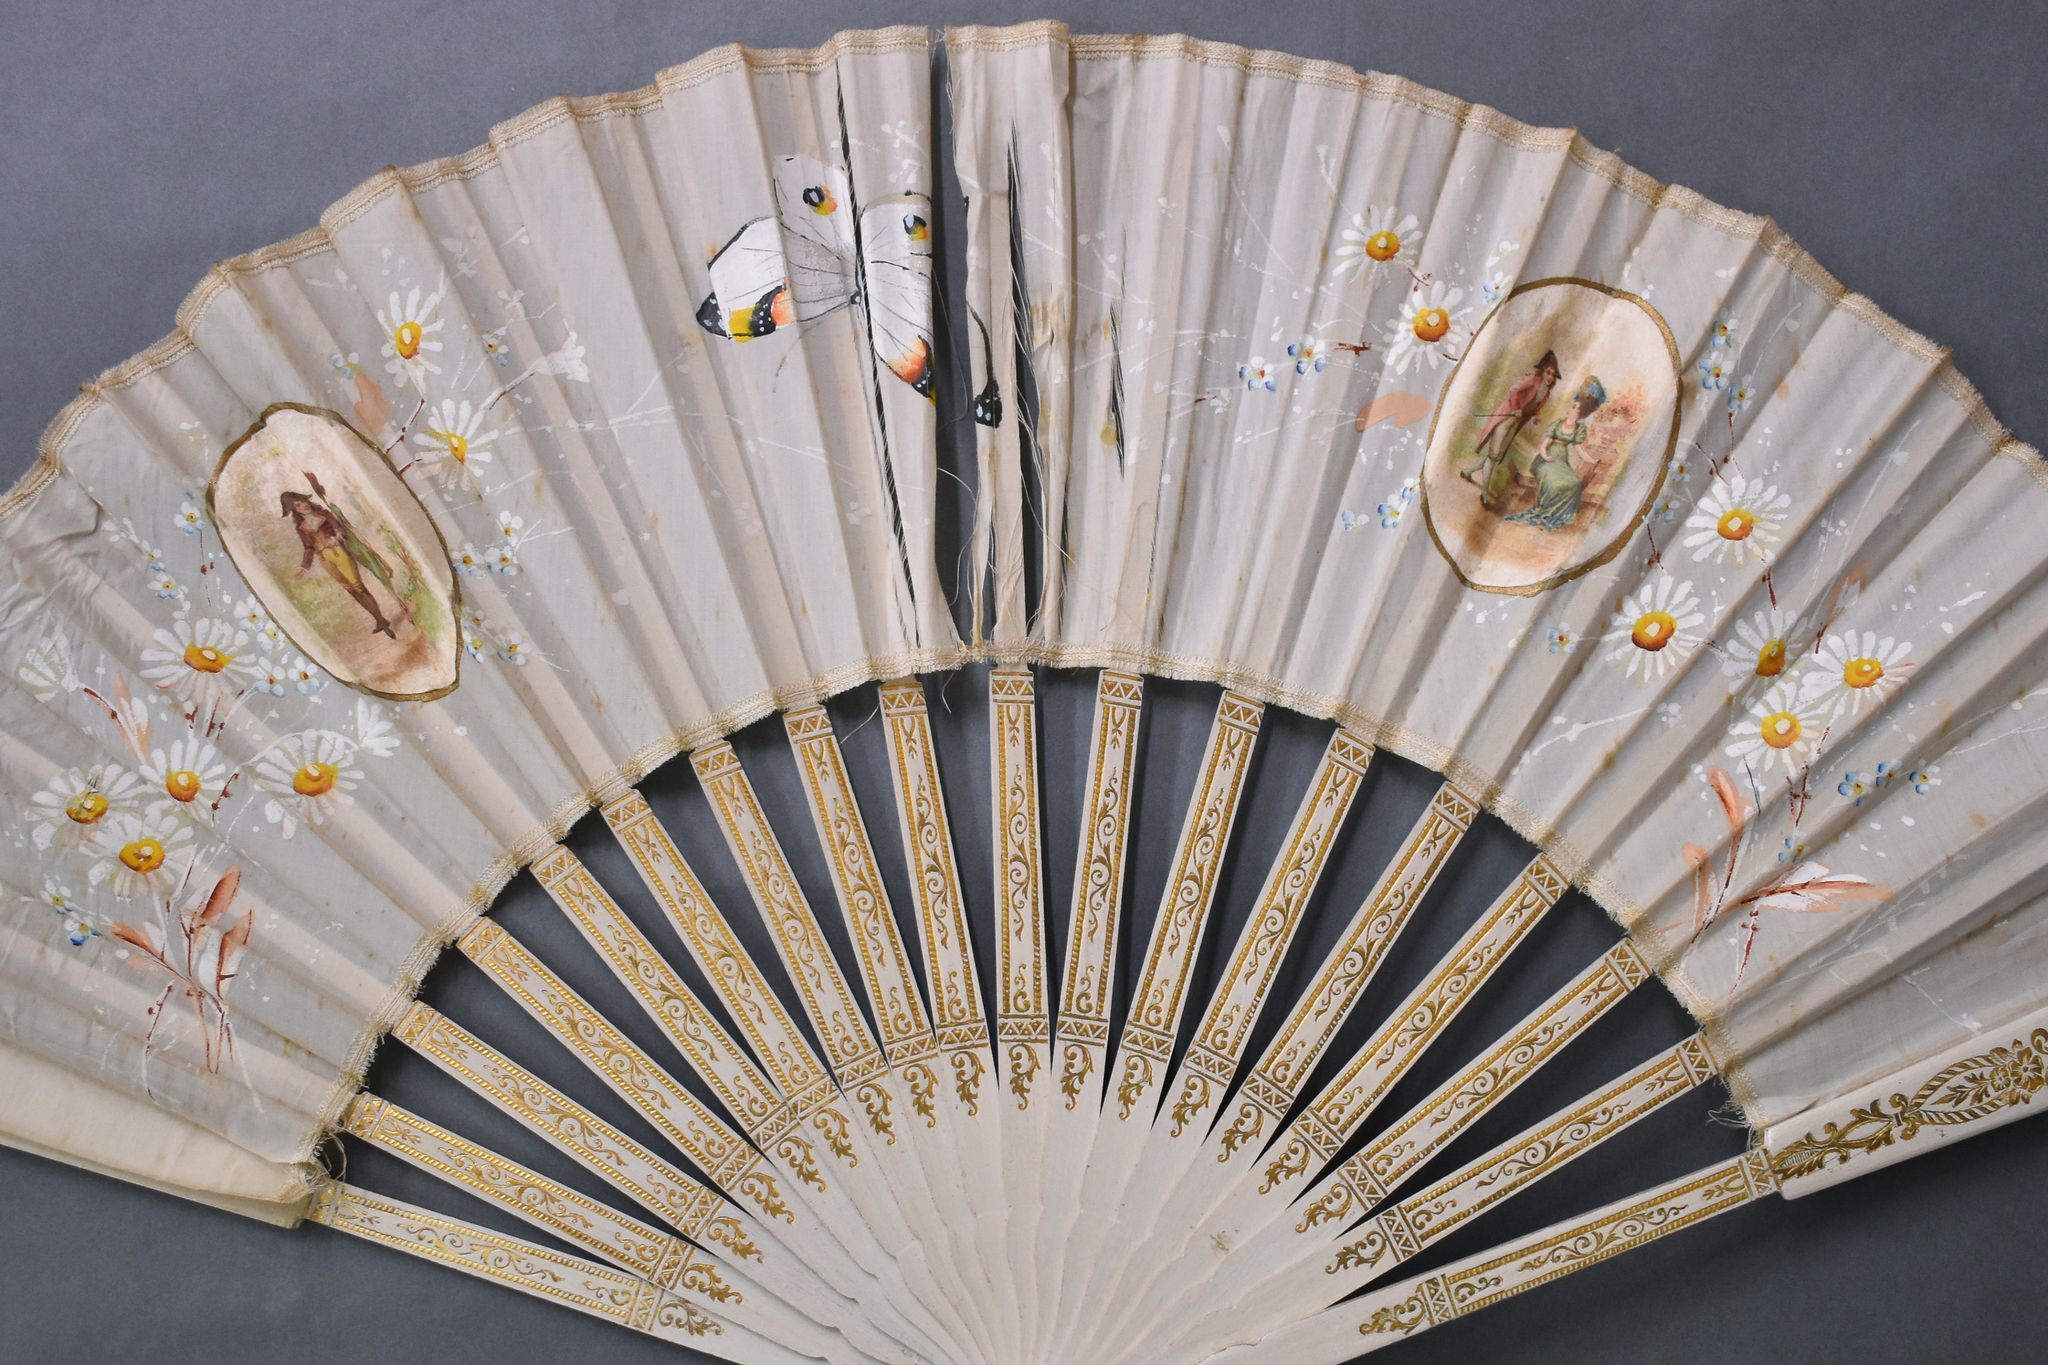 Fan in need of conservation